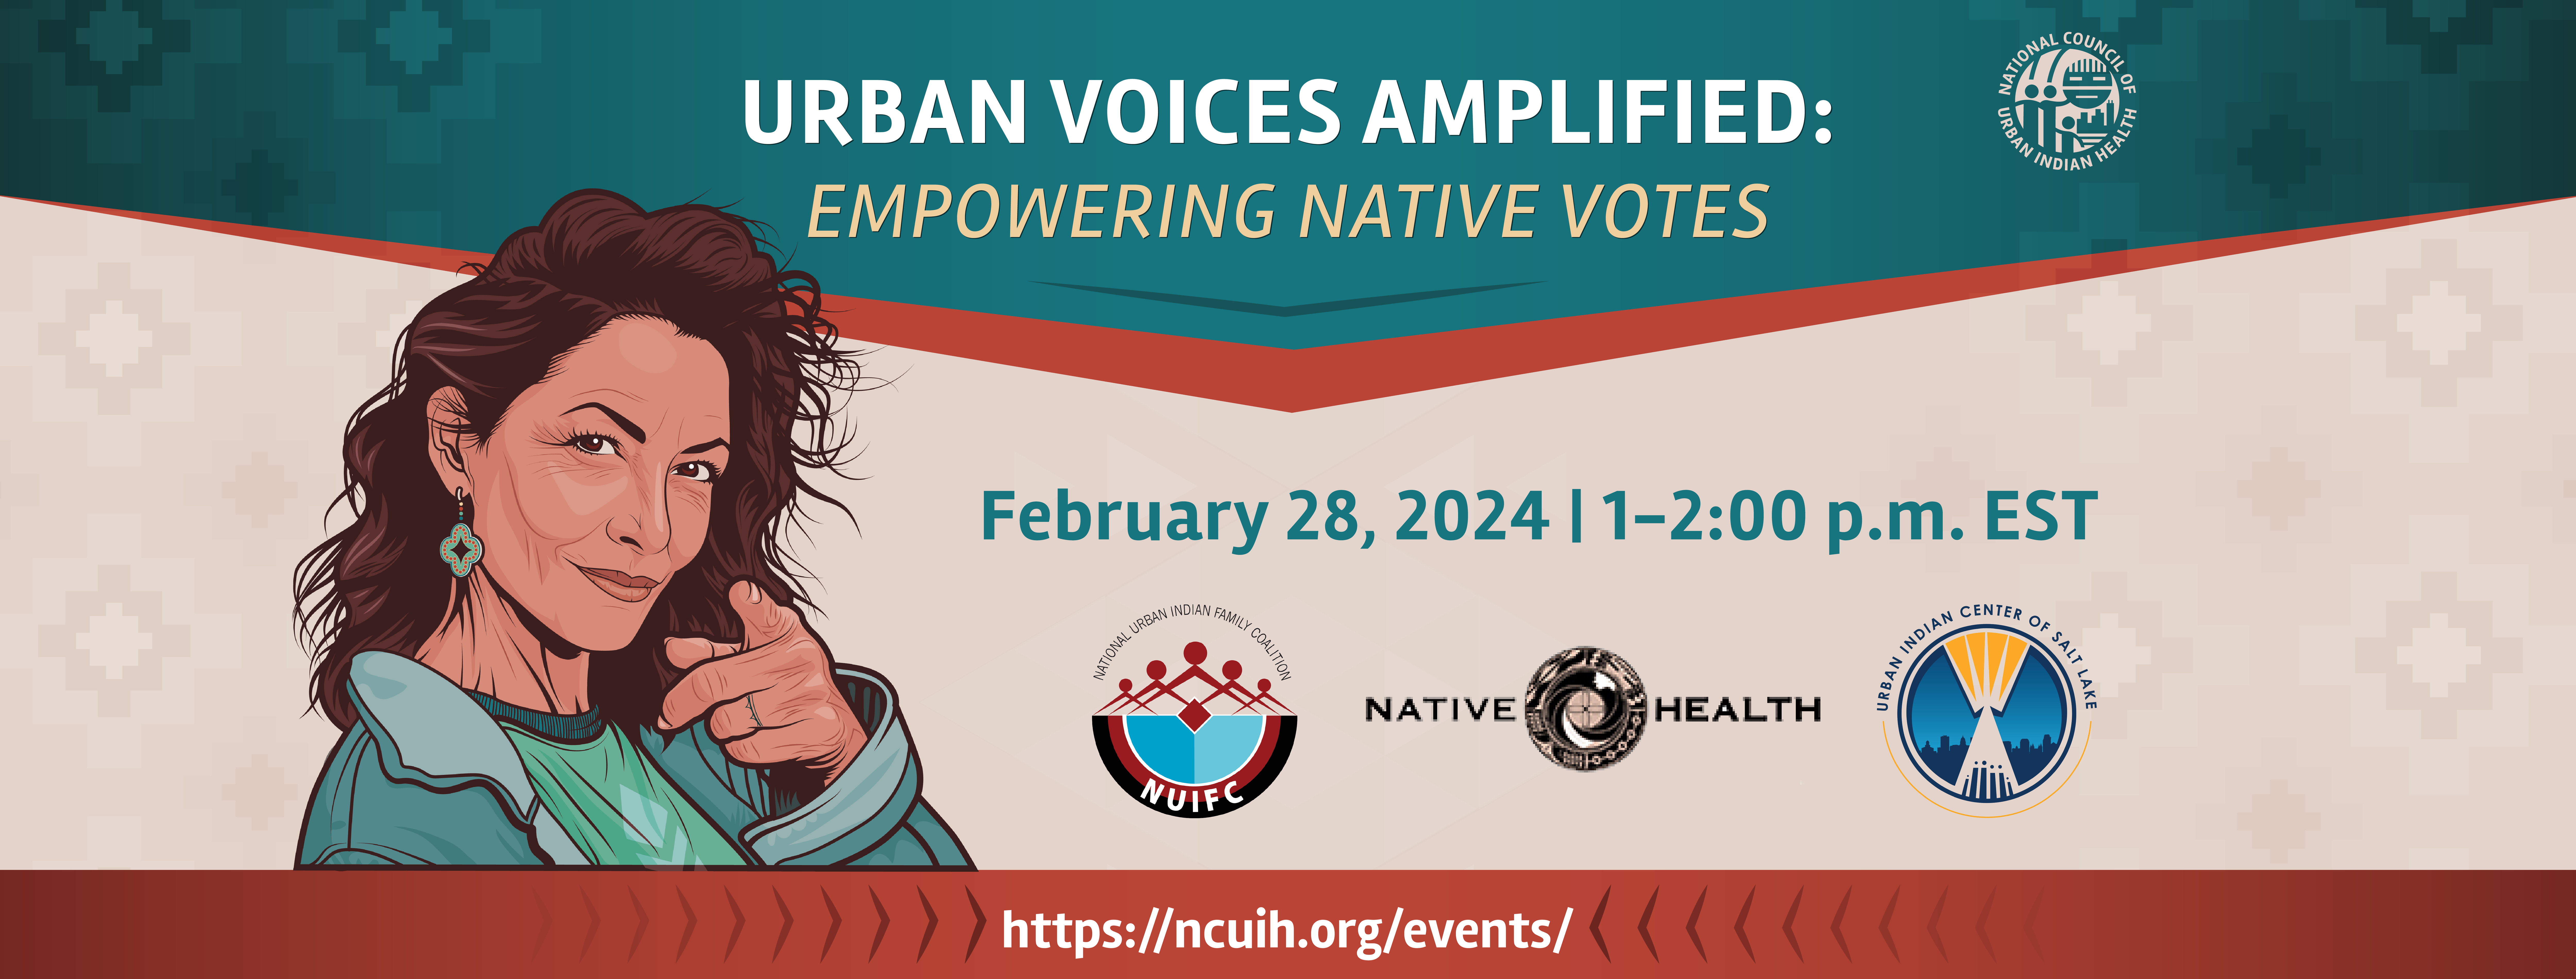 Urban Voices Amplified: Empowering Native Votes